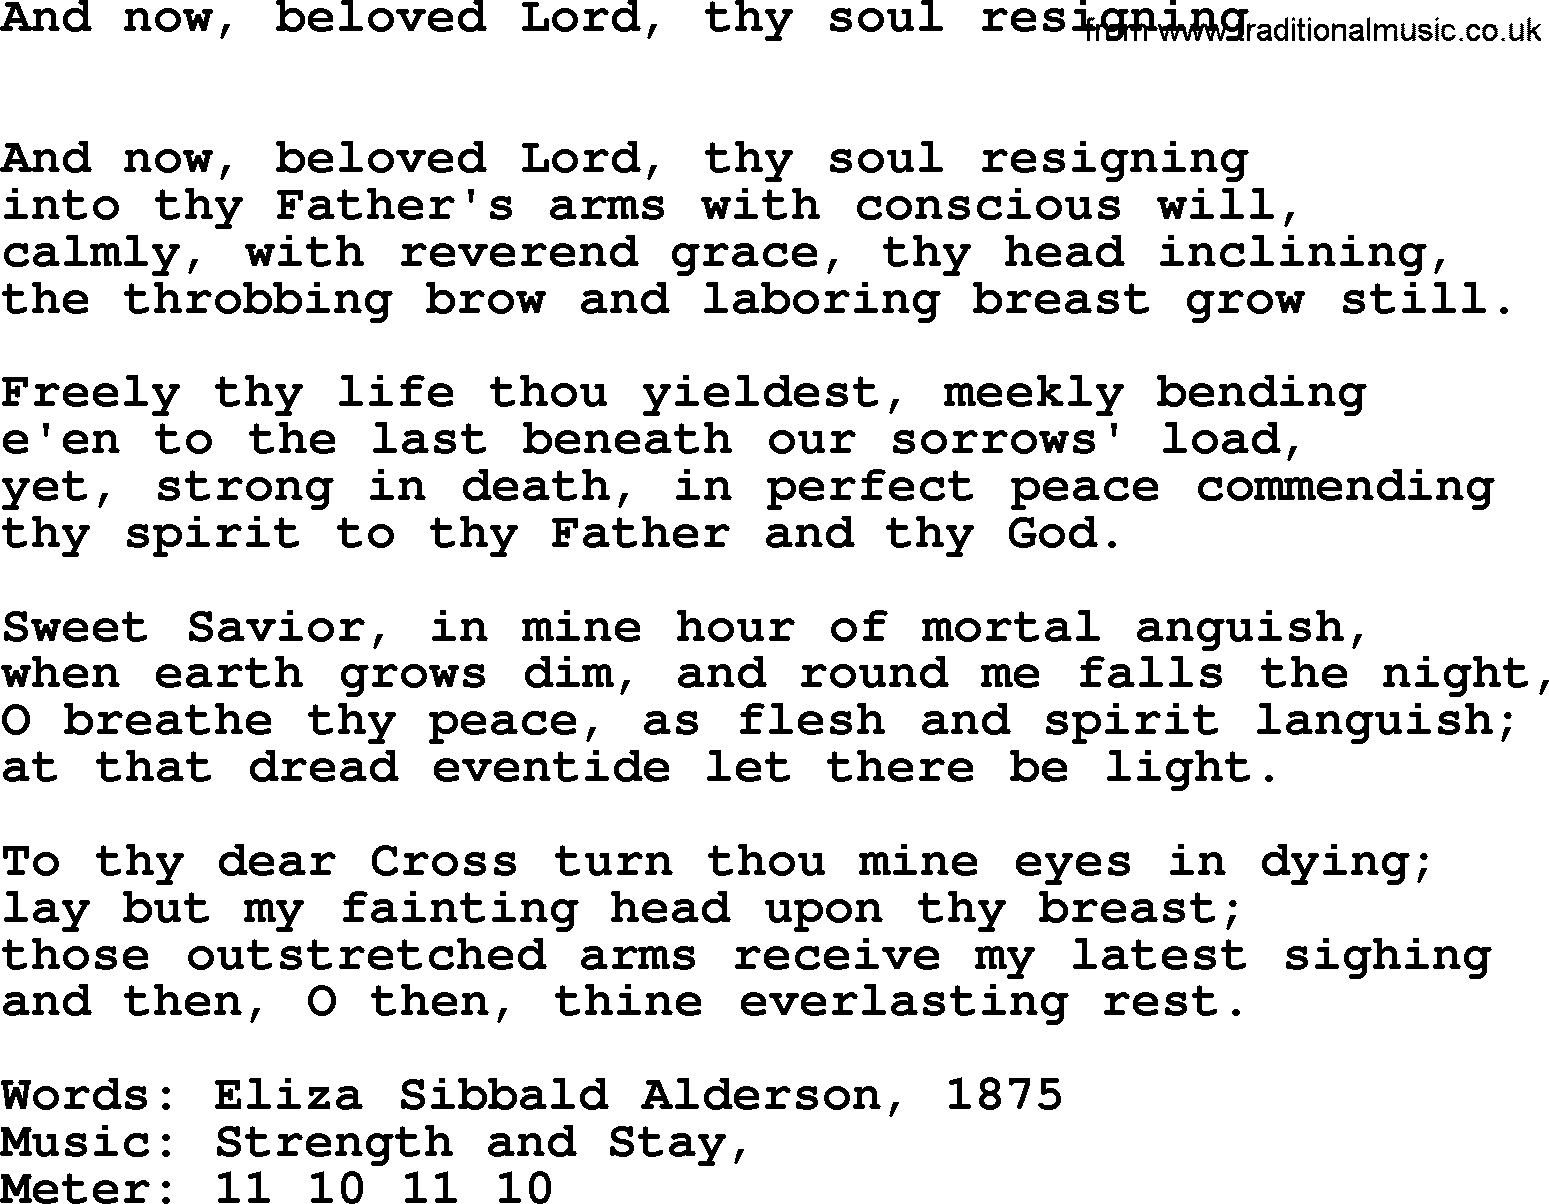 Book of Common Praise Hymn: And Now, Beloved Lord, Thy Soul Resigning.txt lyrics with midi music